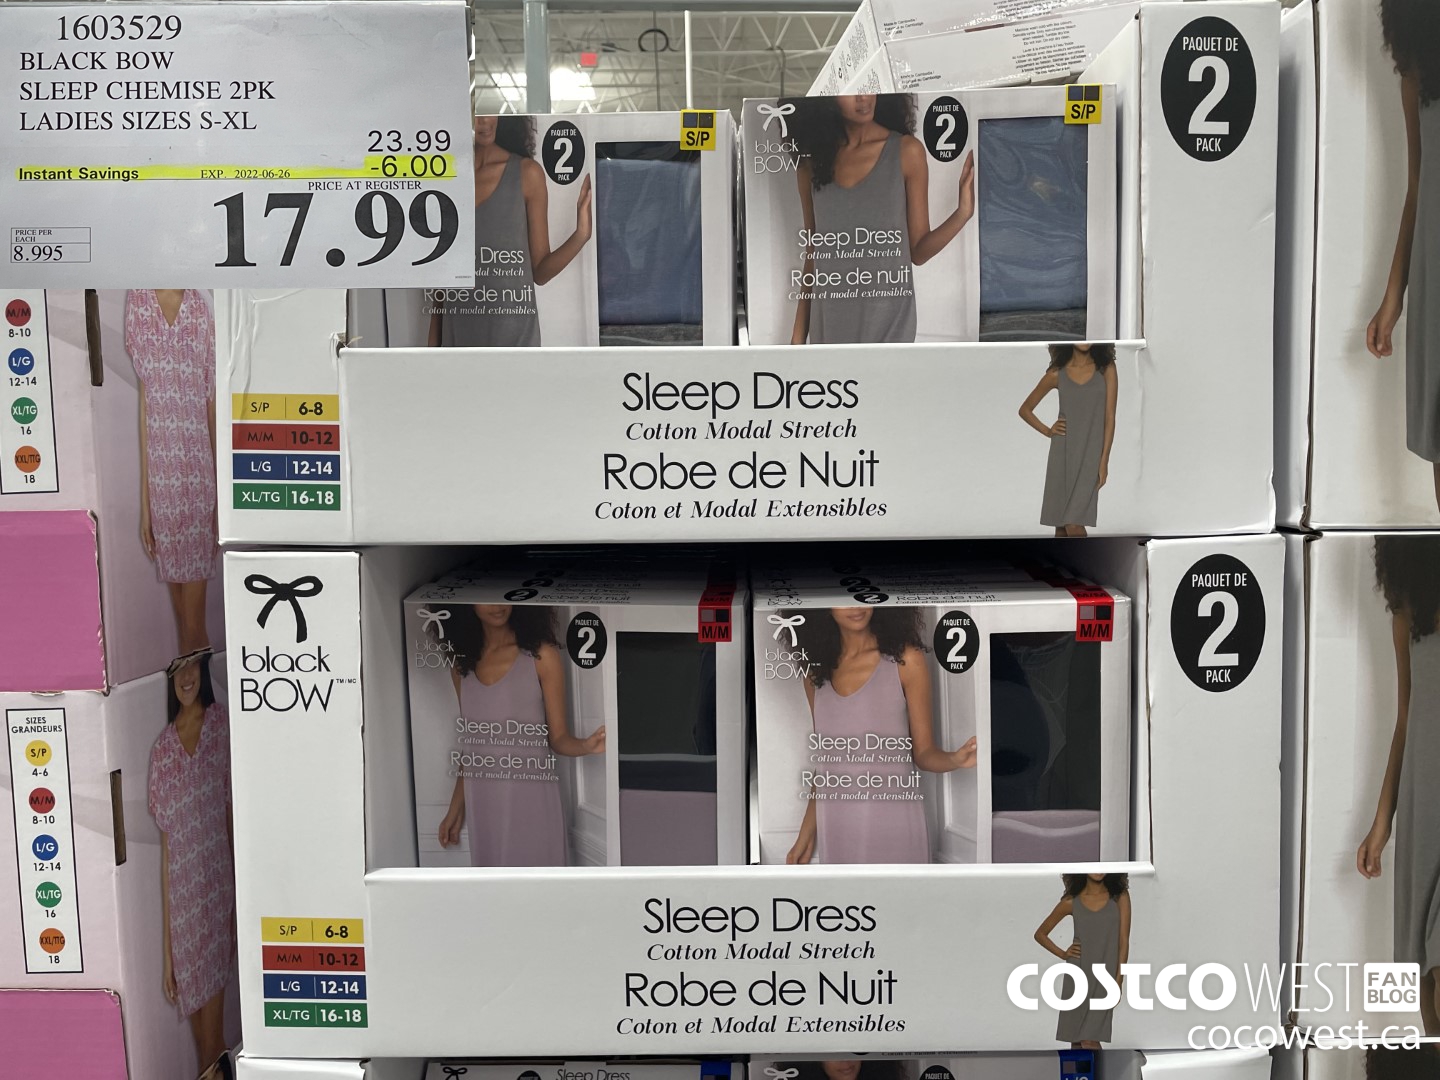 Weekend Update! – Costco Sale Items for June 24-26, 2022 for BC, AB, MB, SK  - Costco West Fan Blog